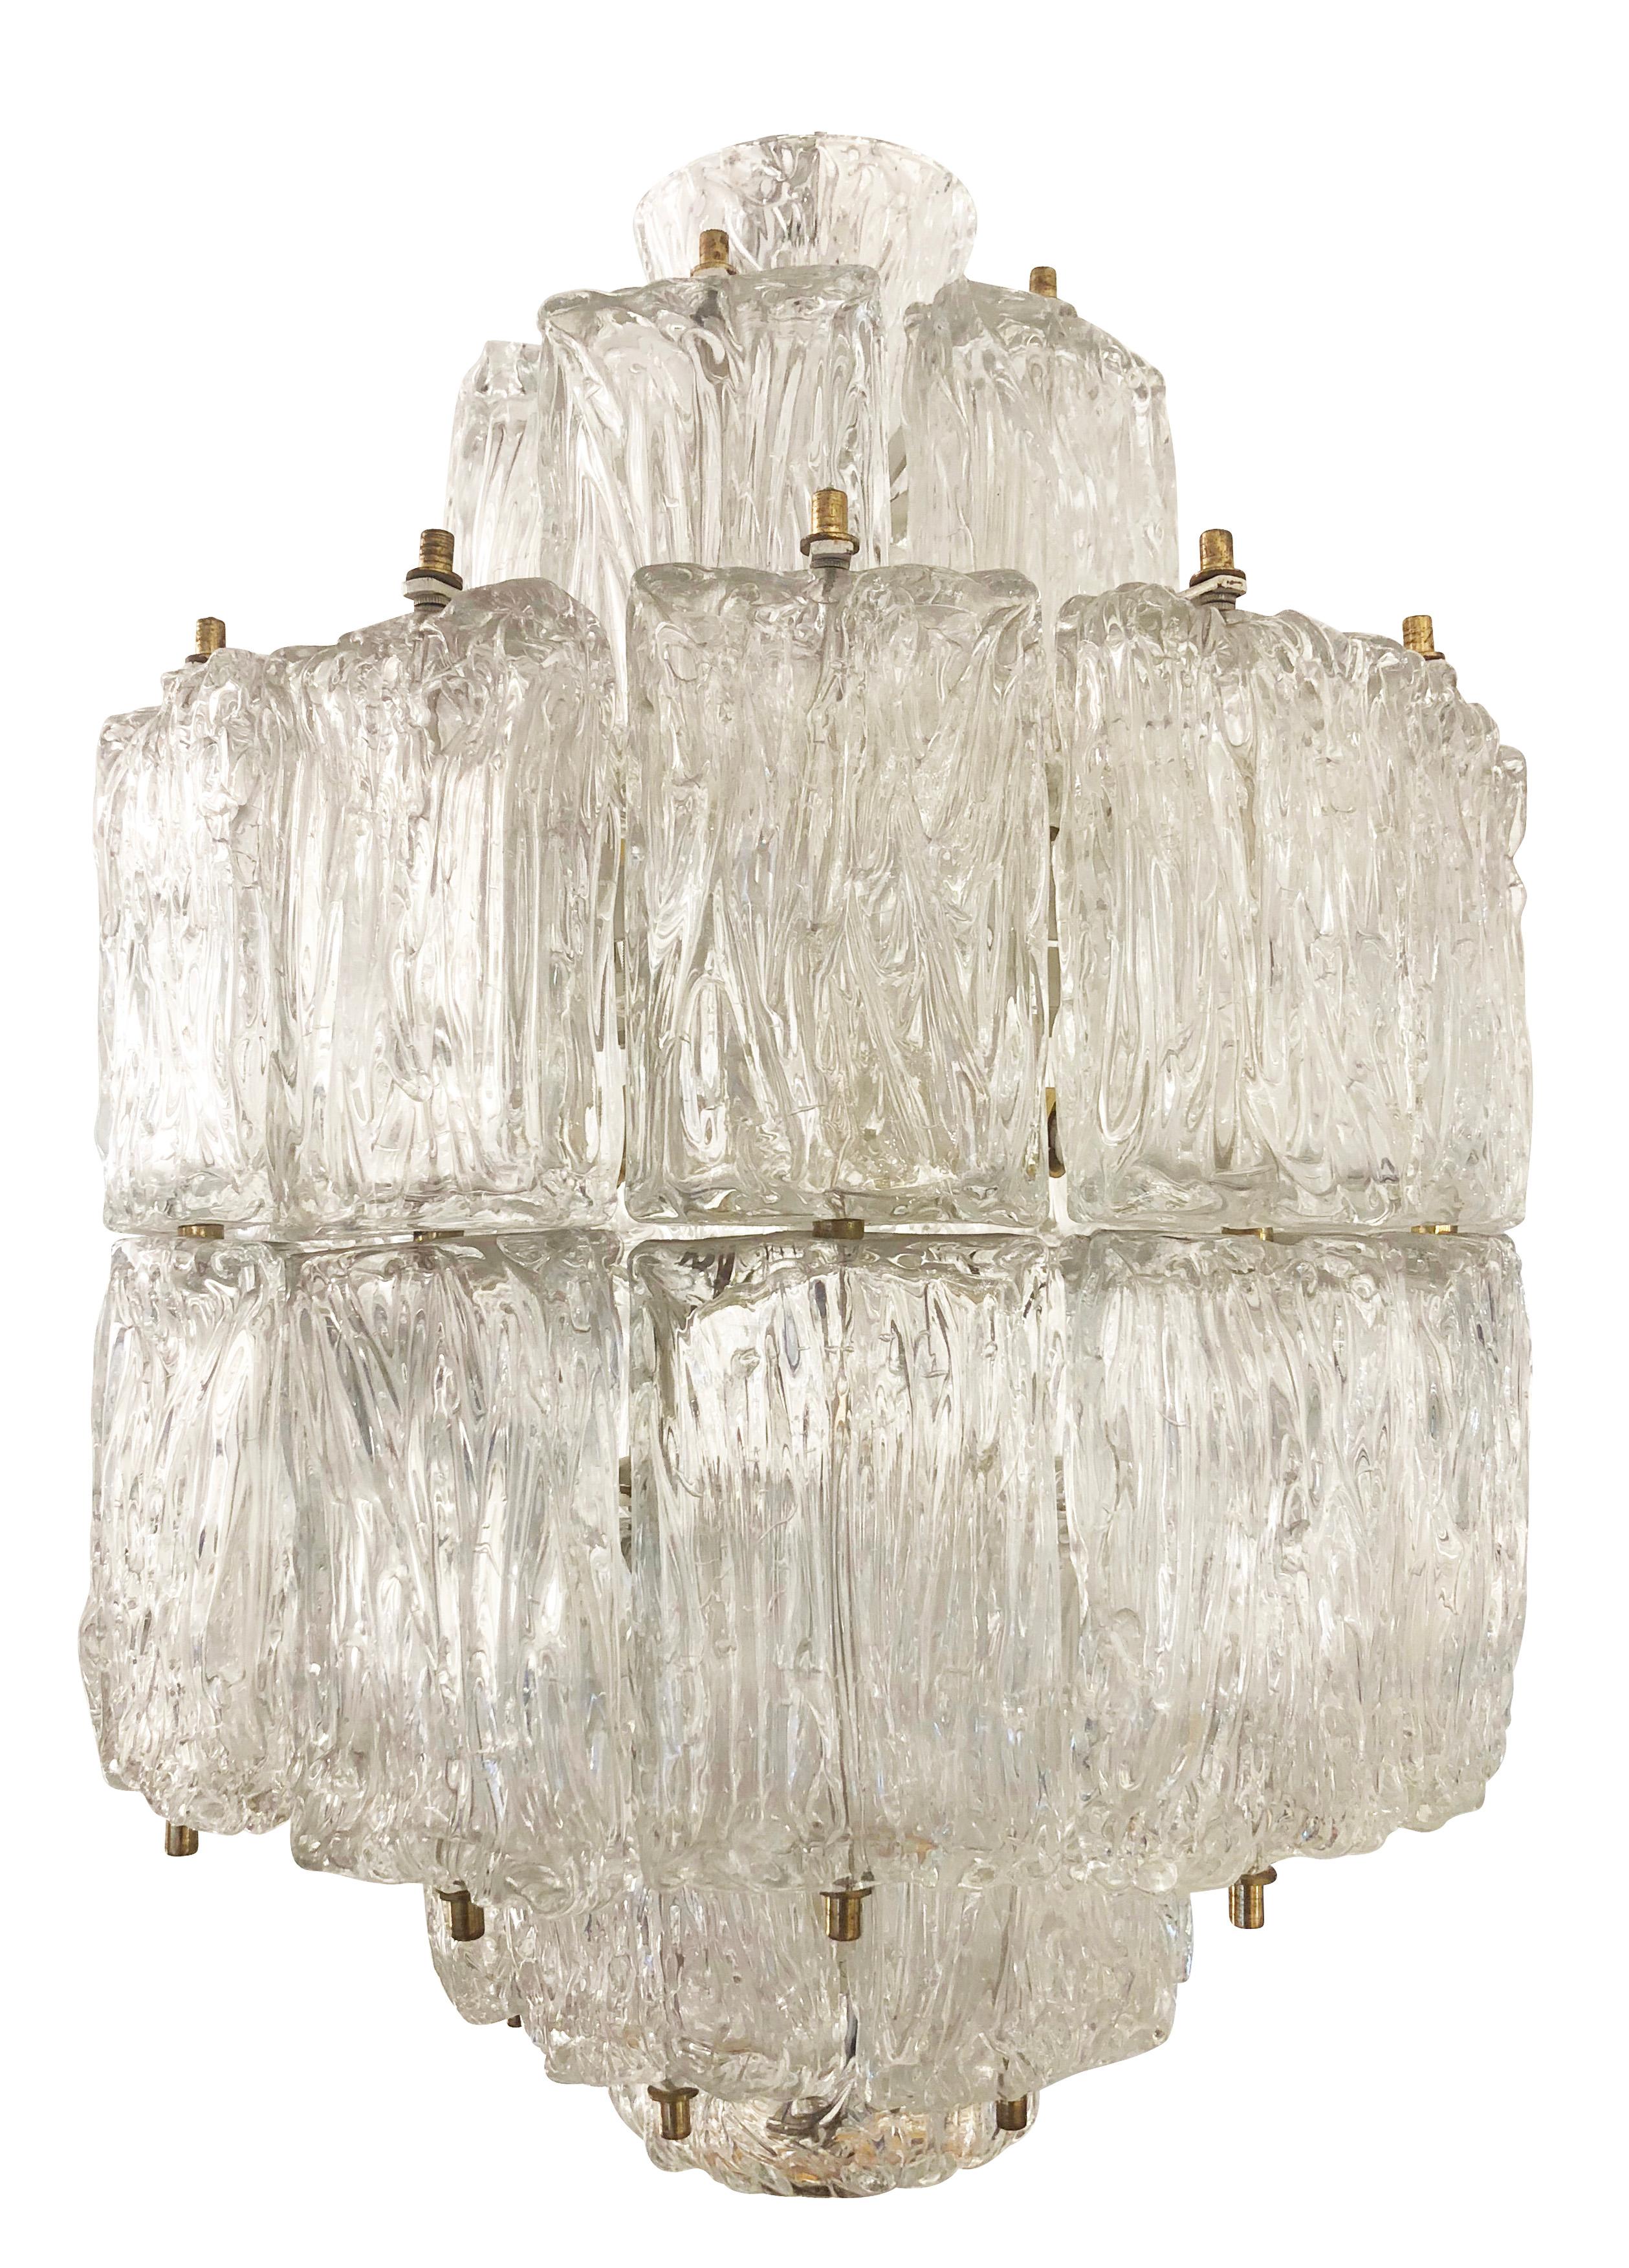 Italian Textured Glass Barovier and Toso Chandelier, Italy, 1950s